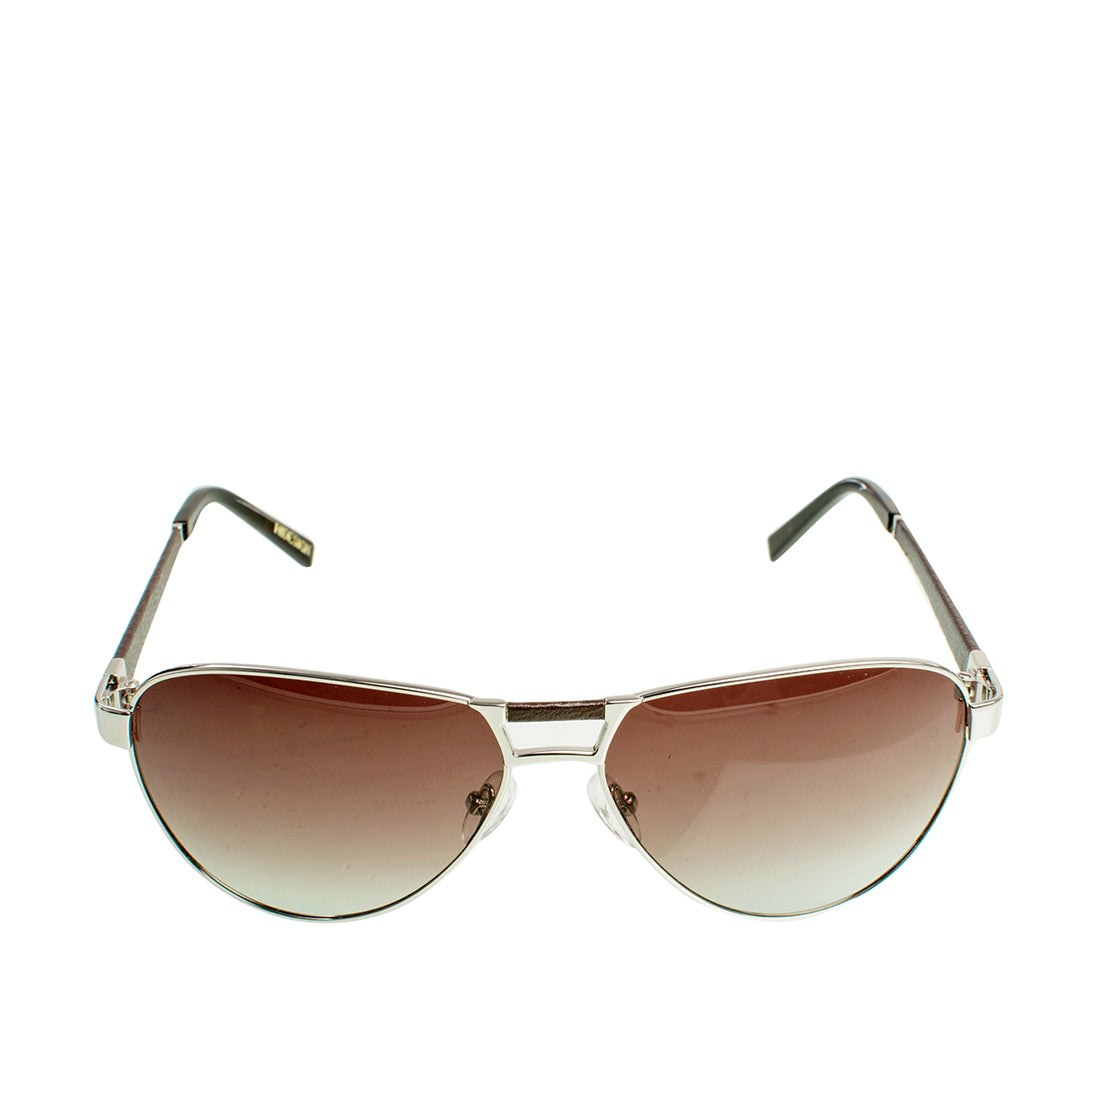 Buy NOT GIVING A DAMN YELLOW AVIATOR SUNGLASSES for Women Online in India